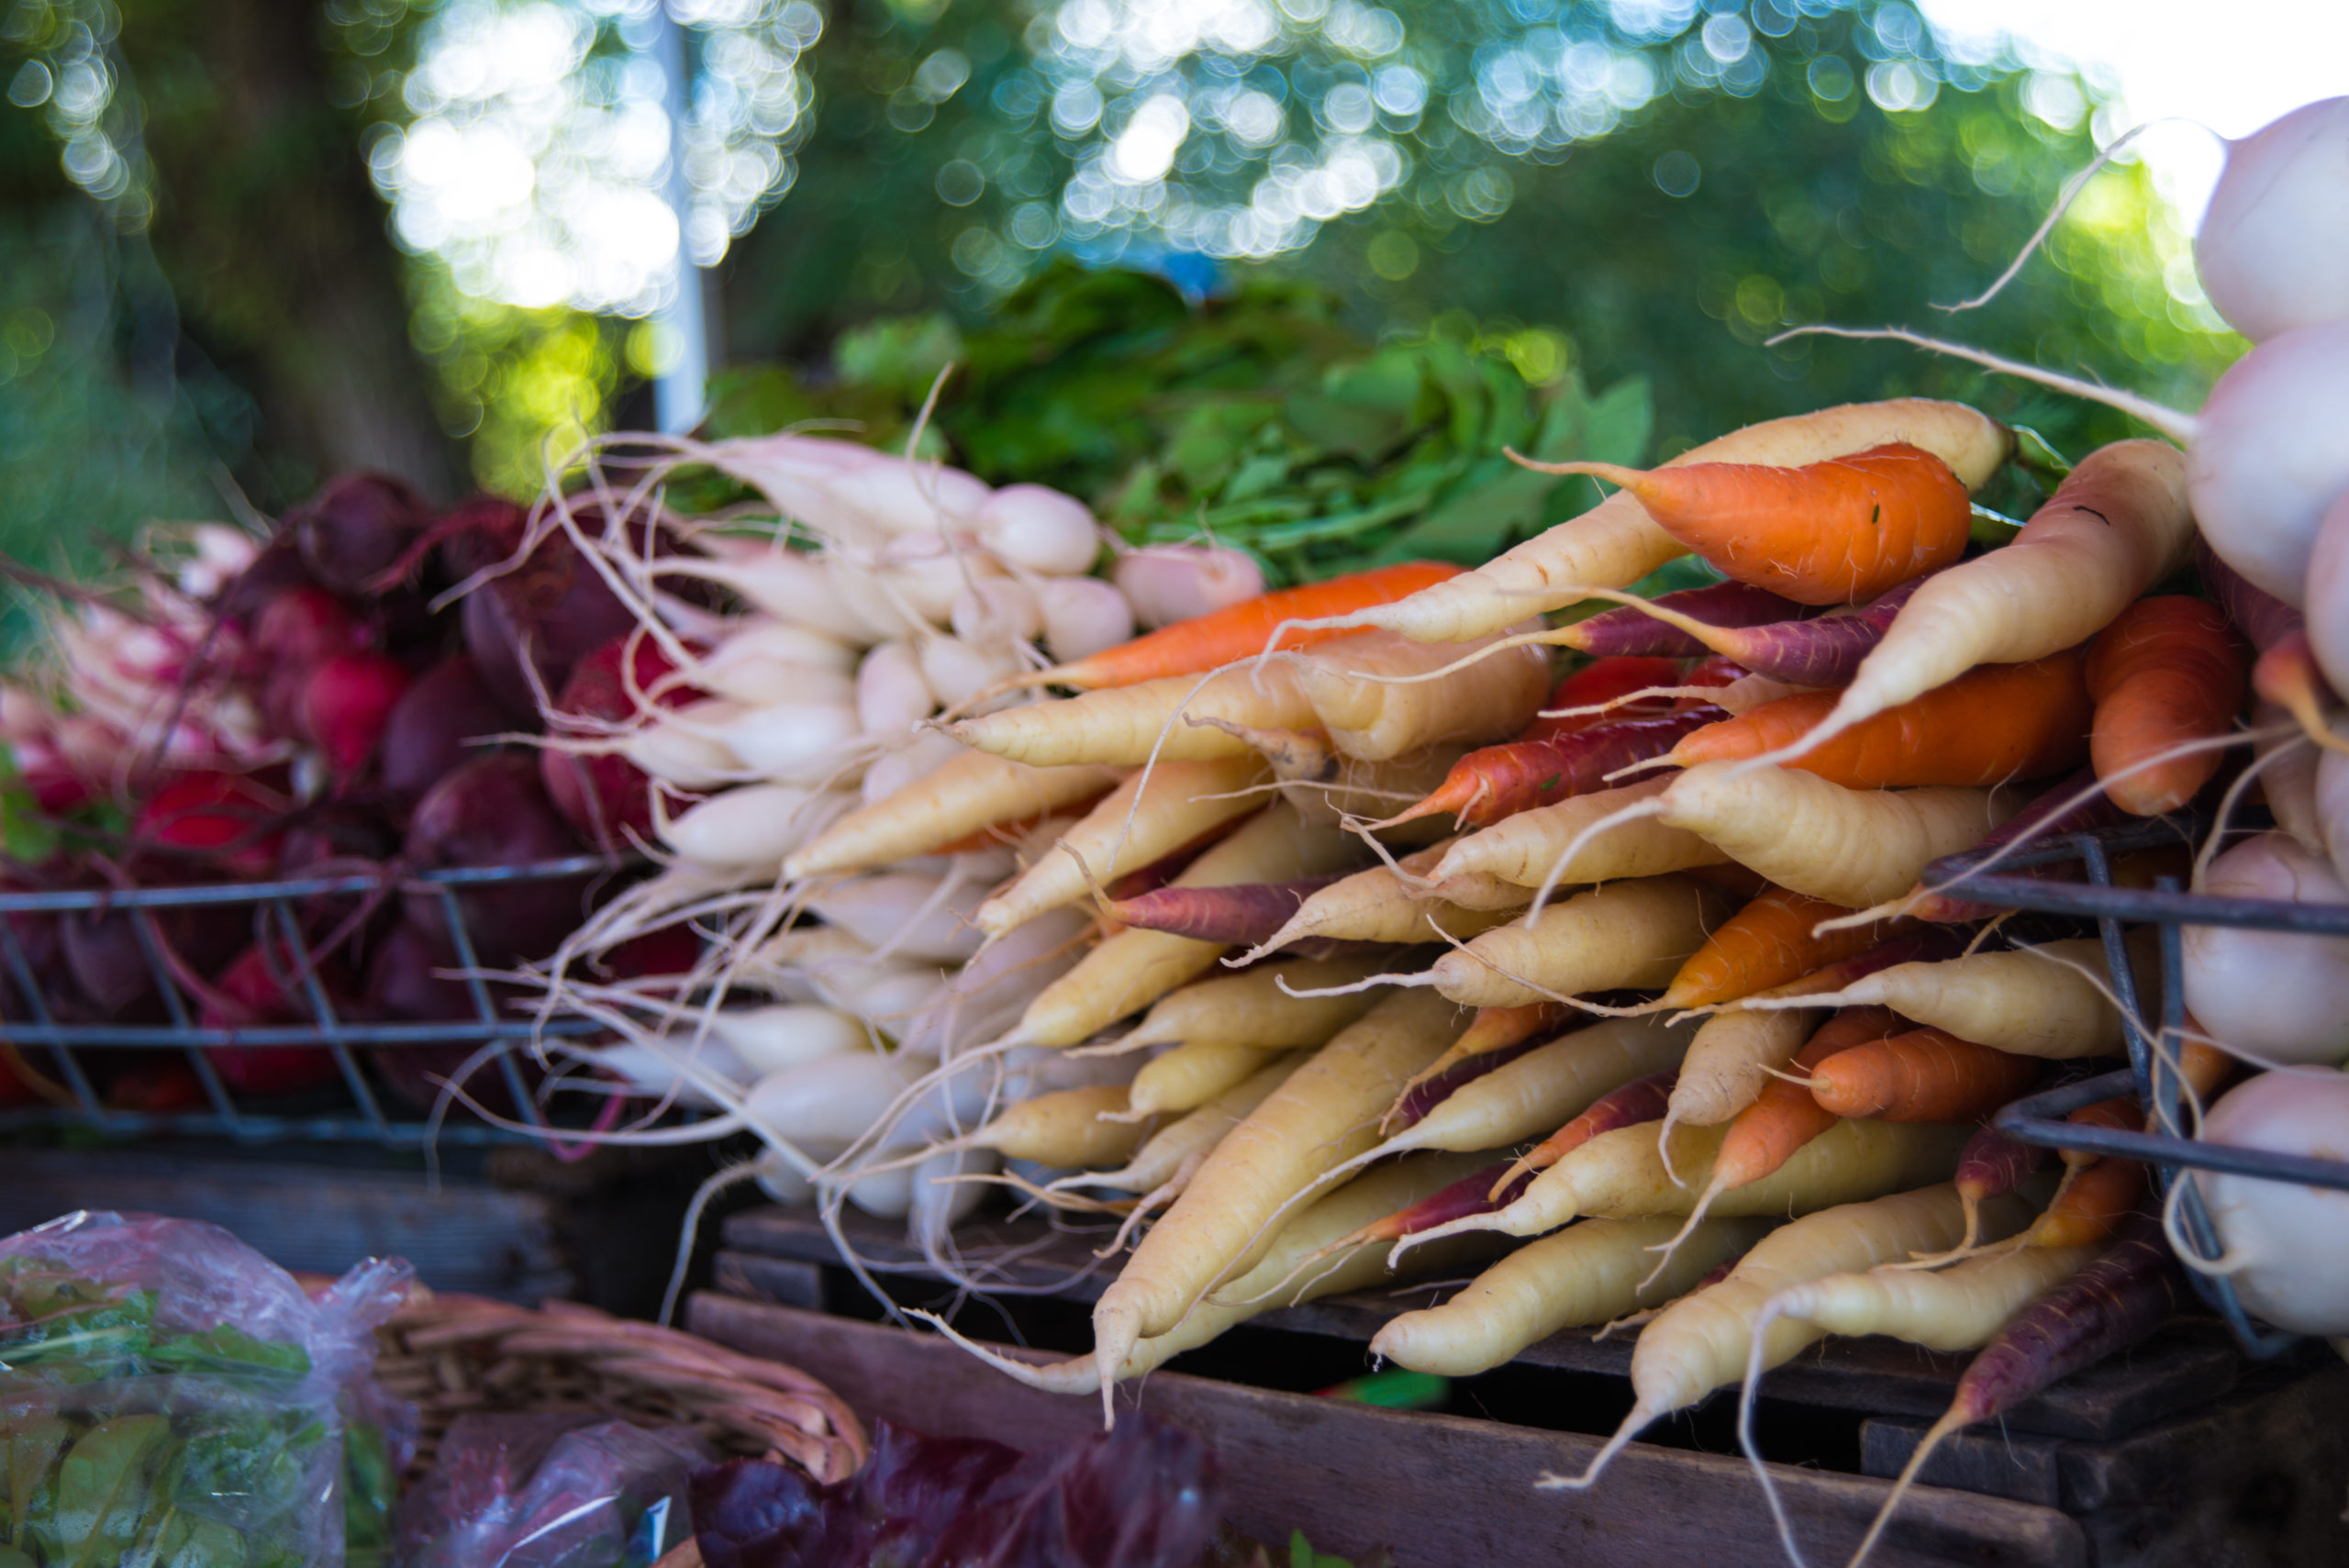 5 Michigan Food Systems Organizations You Should Know